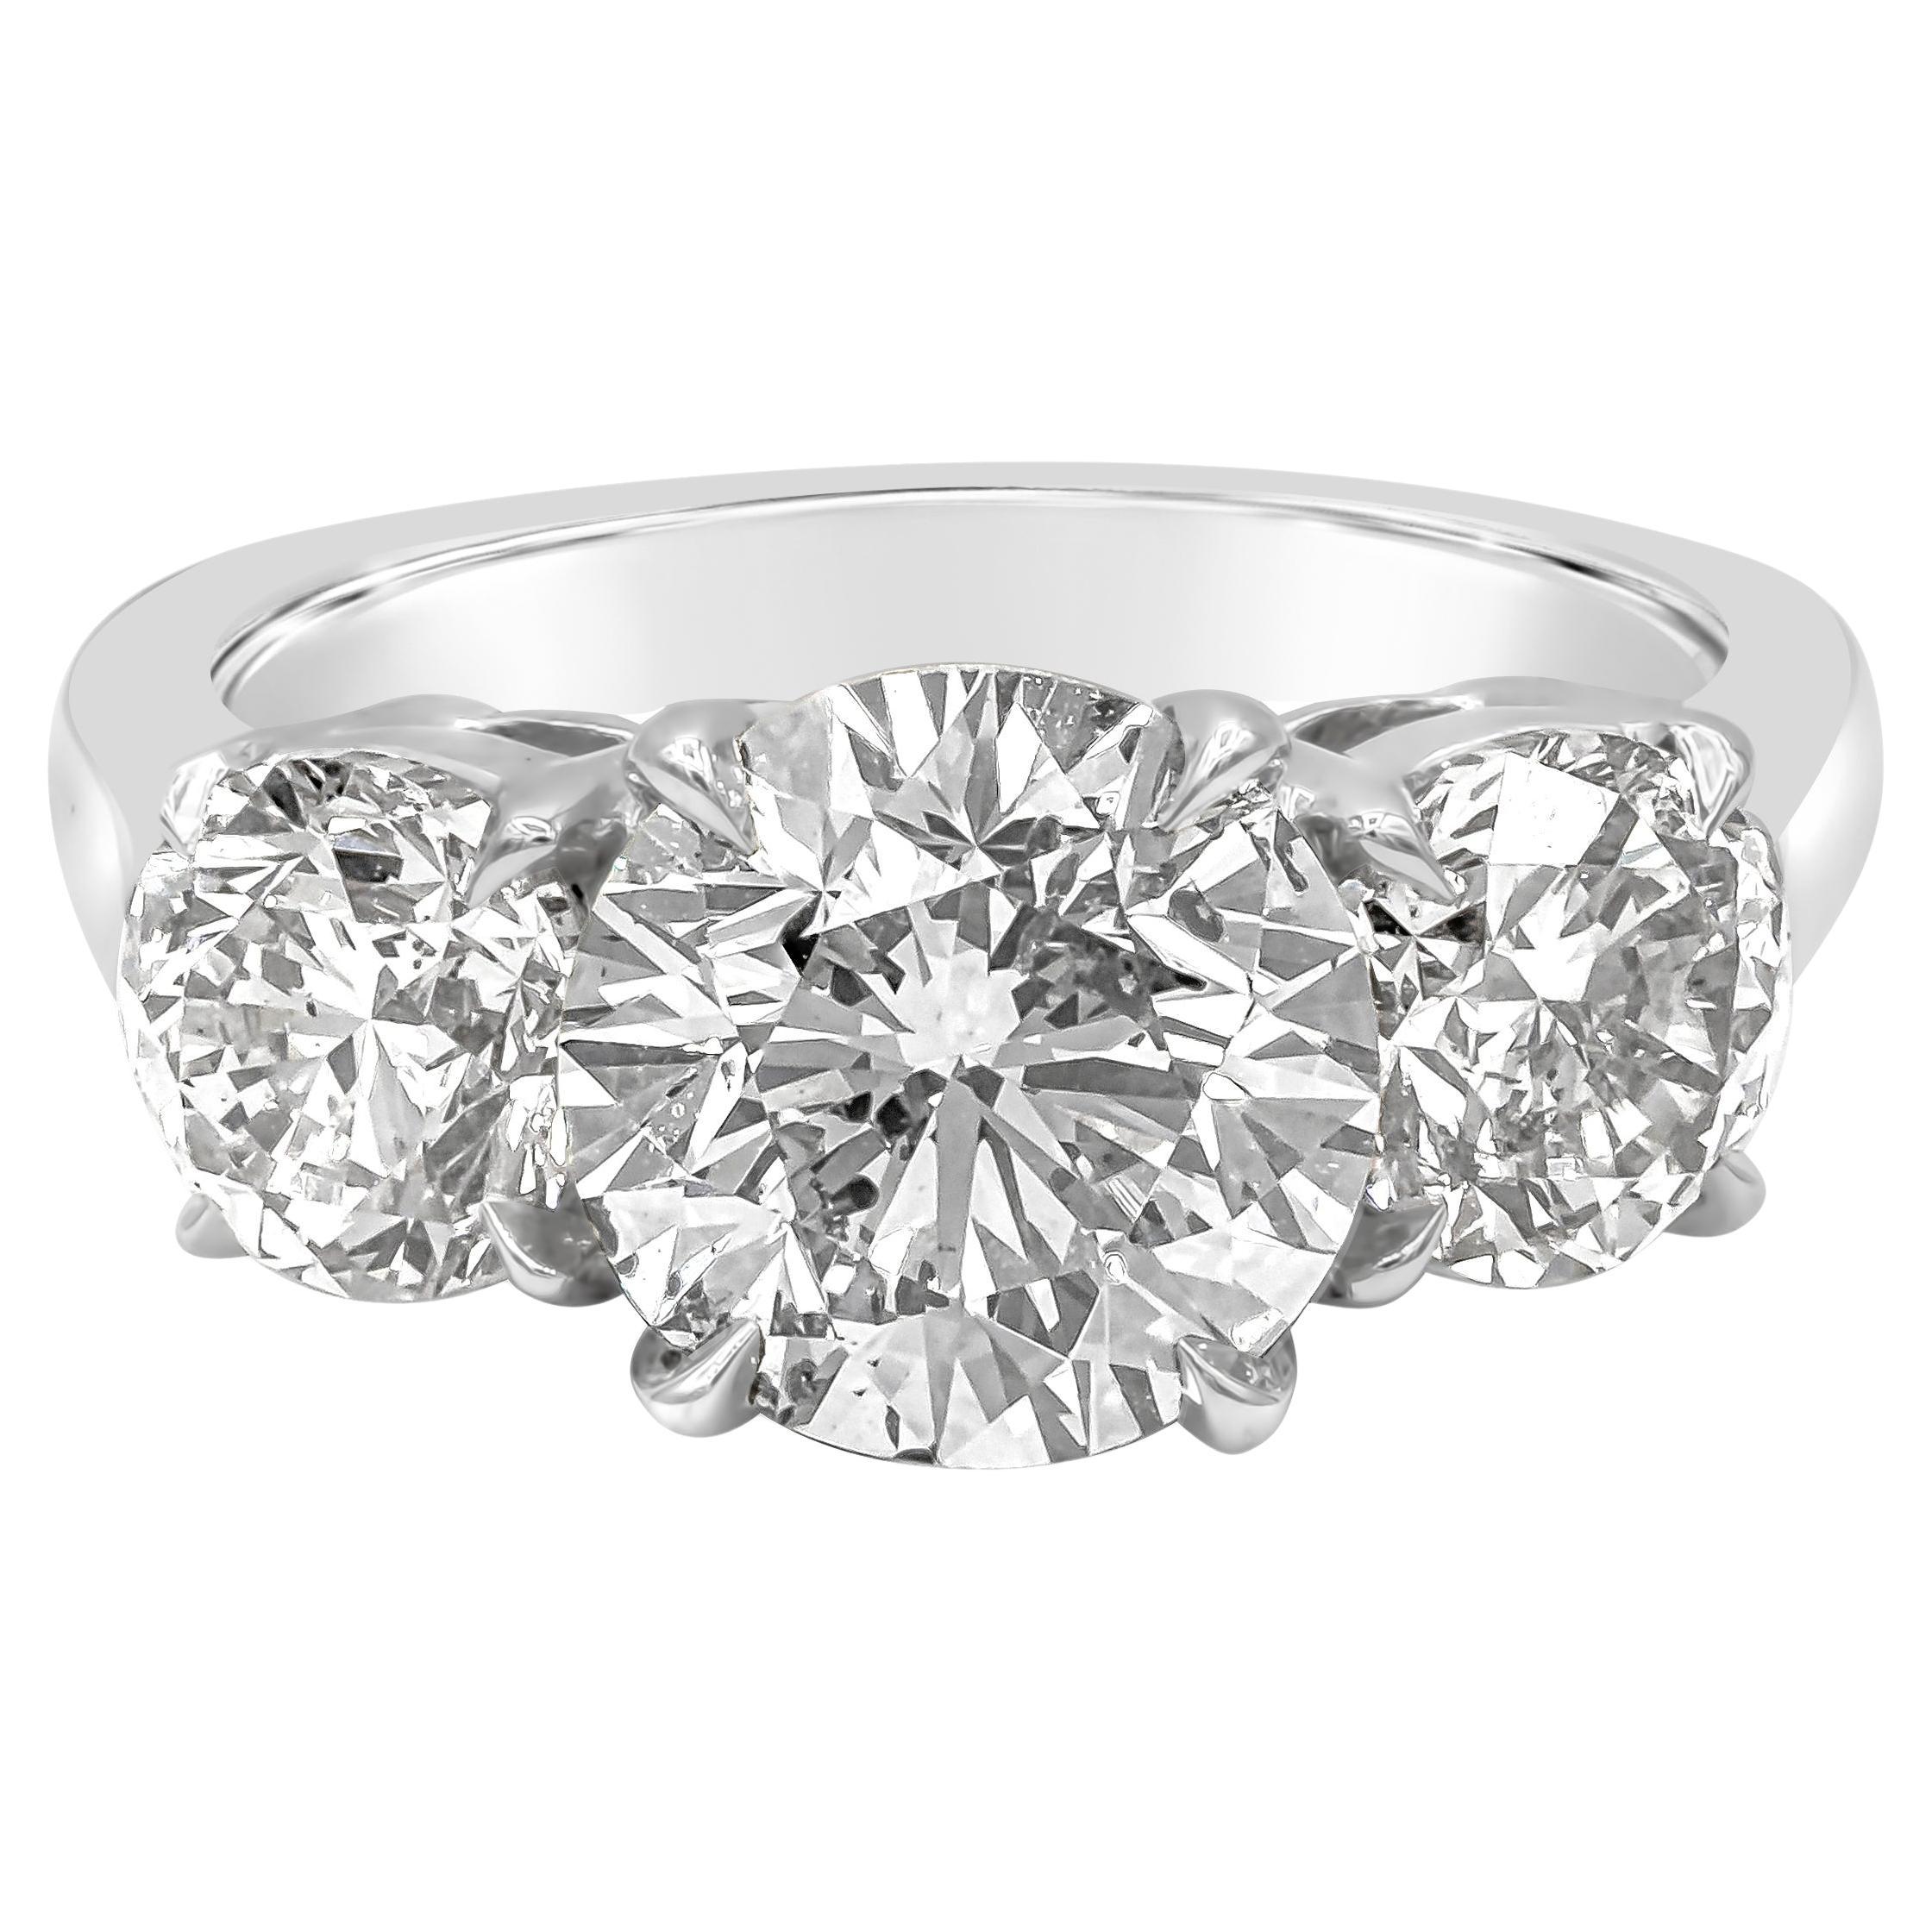 4.71 Carats Total Round Cut Diamond Three-Stone Engagement Ring For Sale